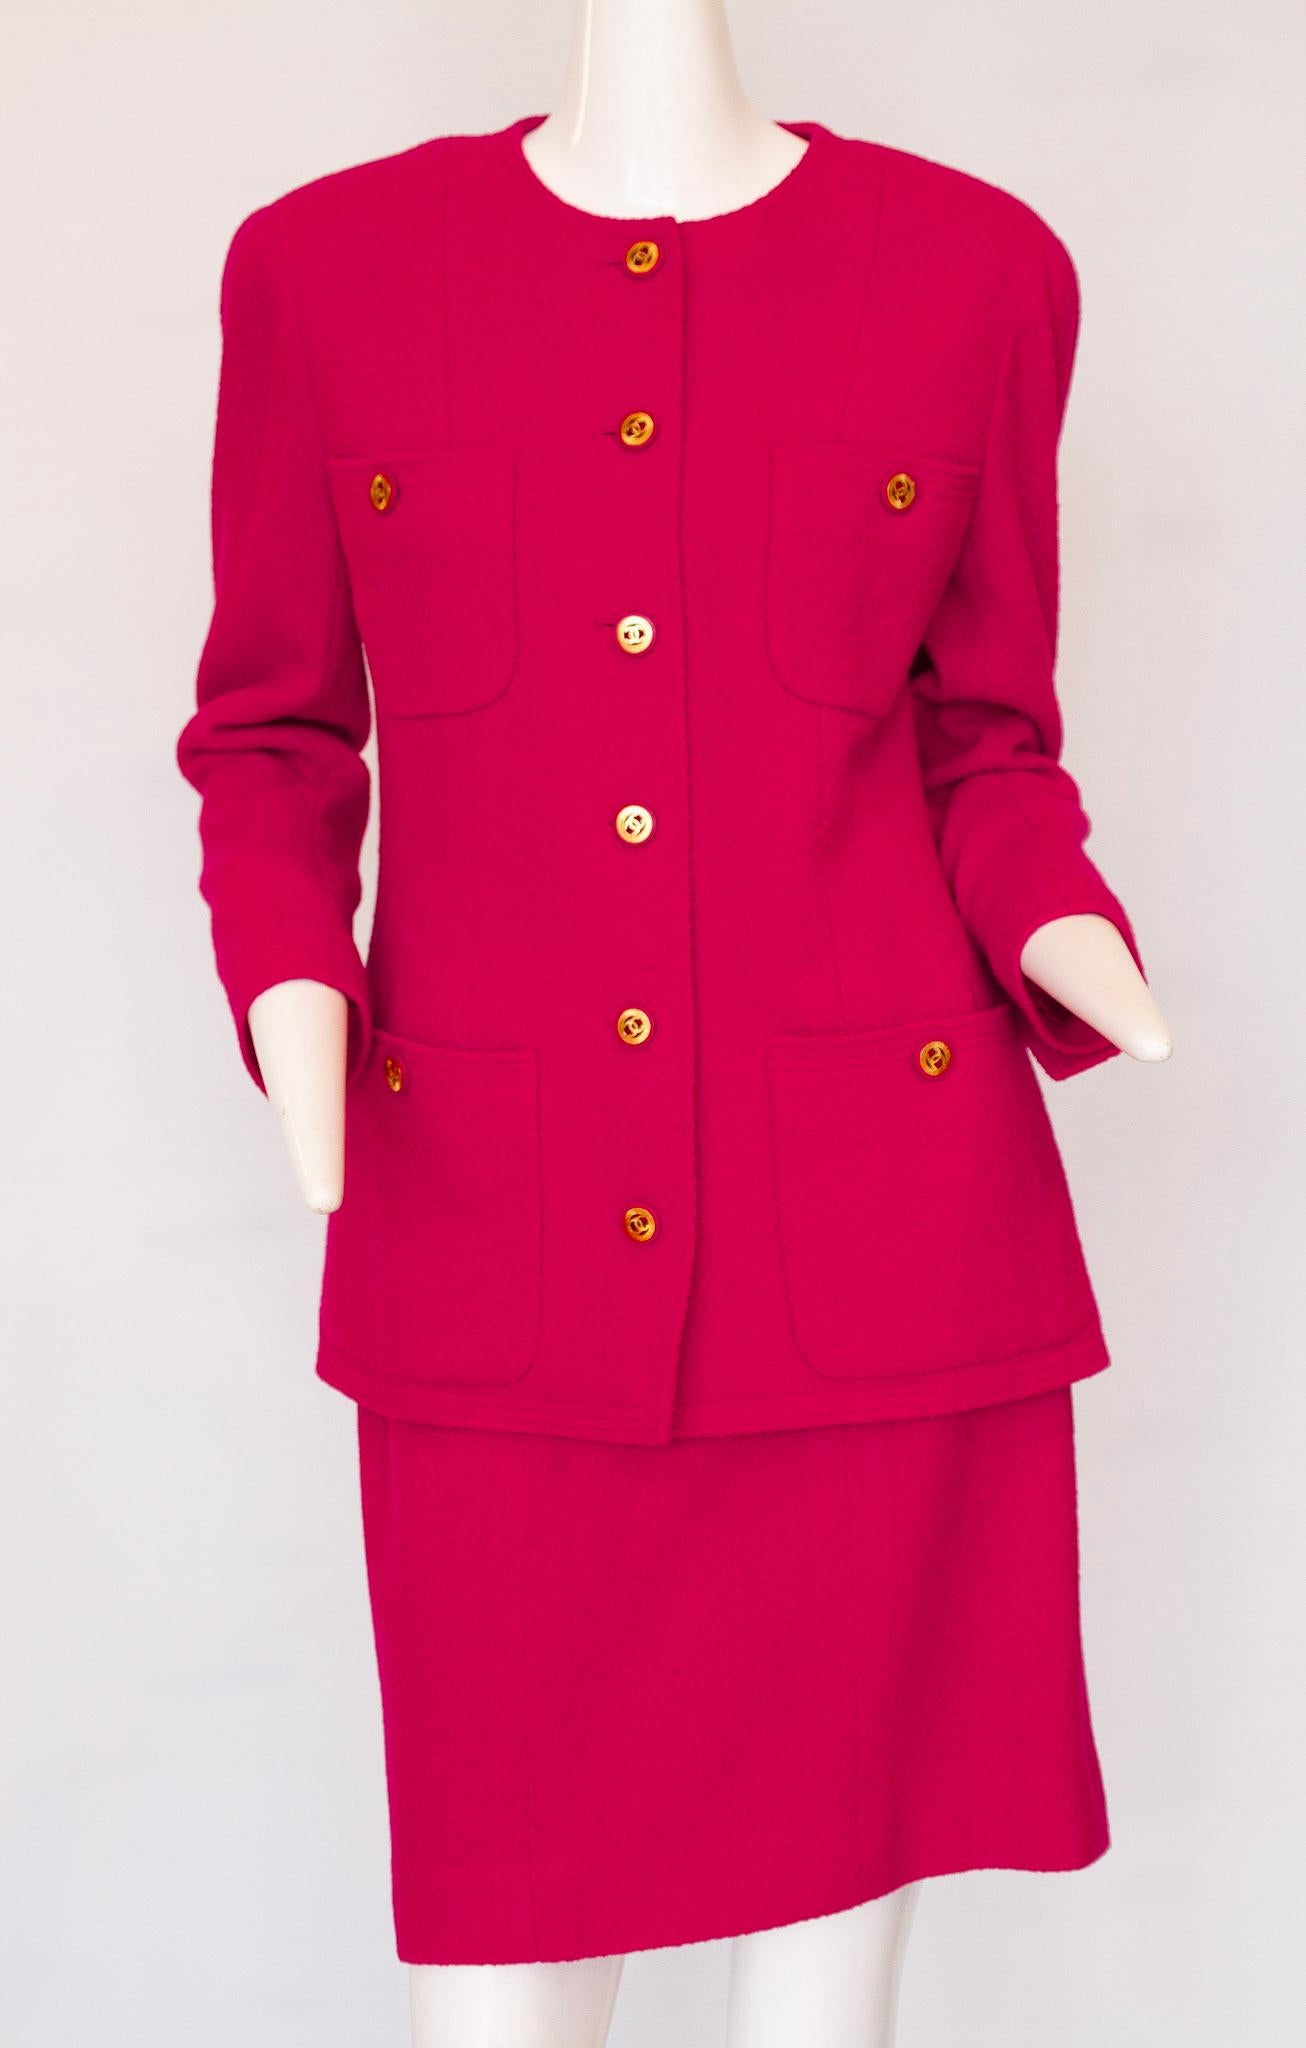 Chanel fuscia or hot pink jacket and skirt ensemble. 